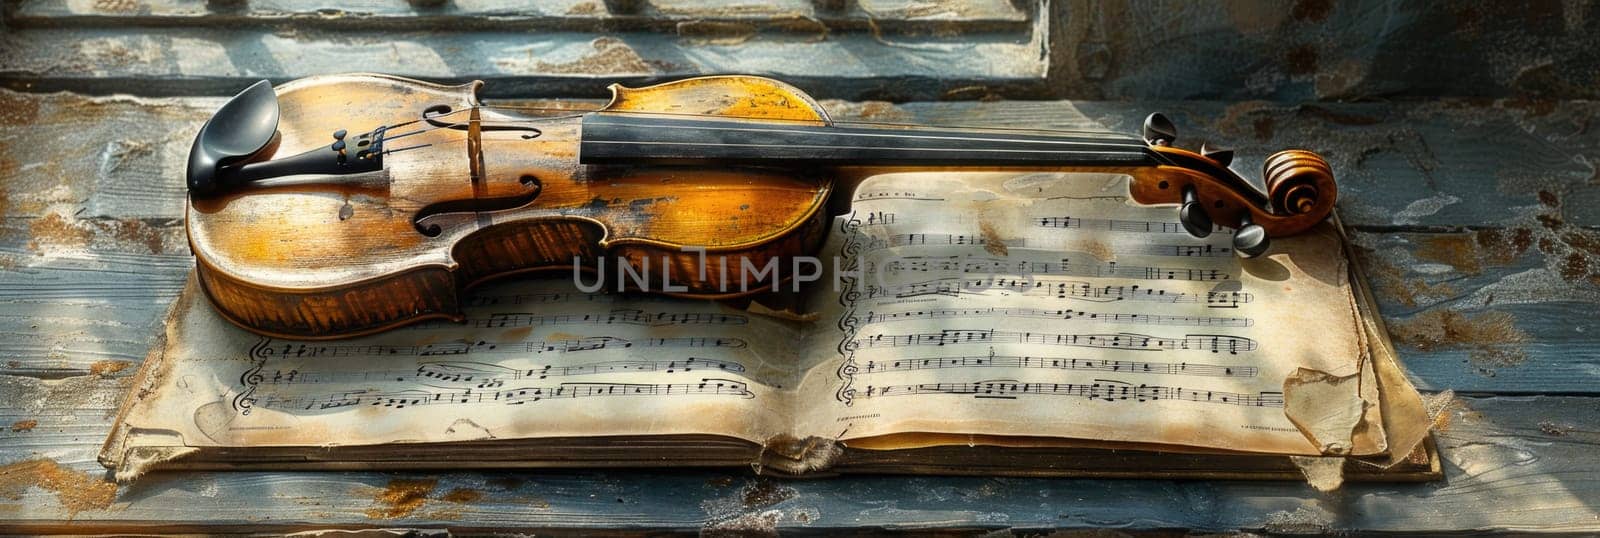 Old Violin Resting on Open Book by but_photo